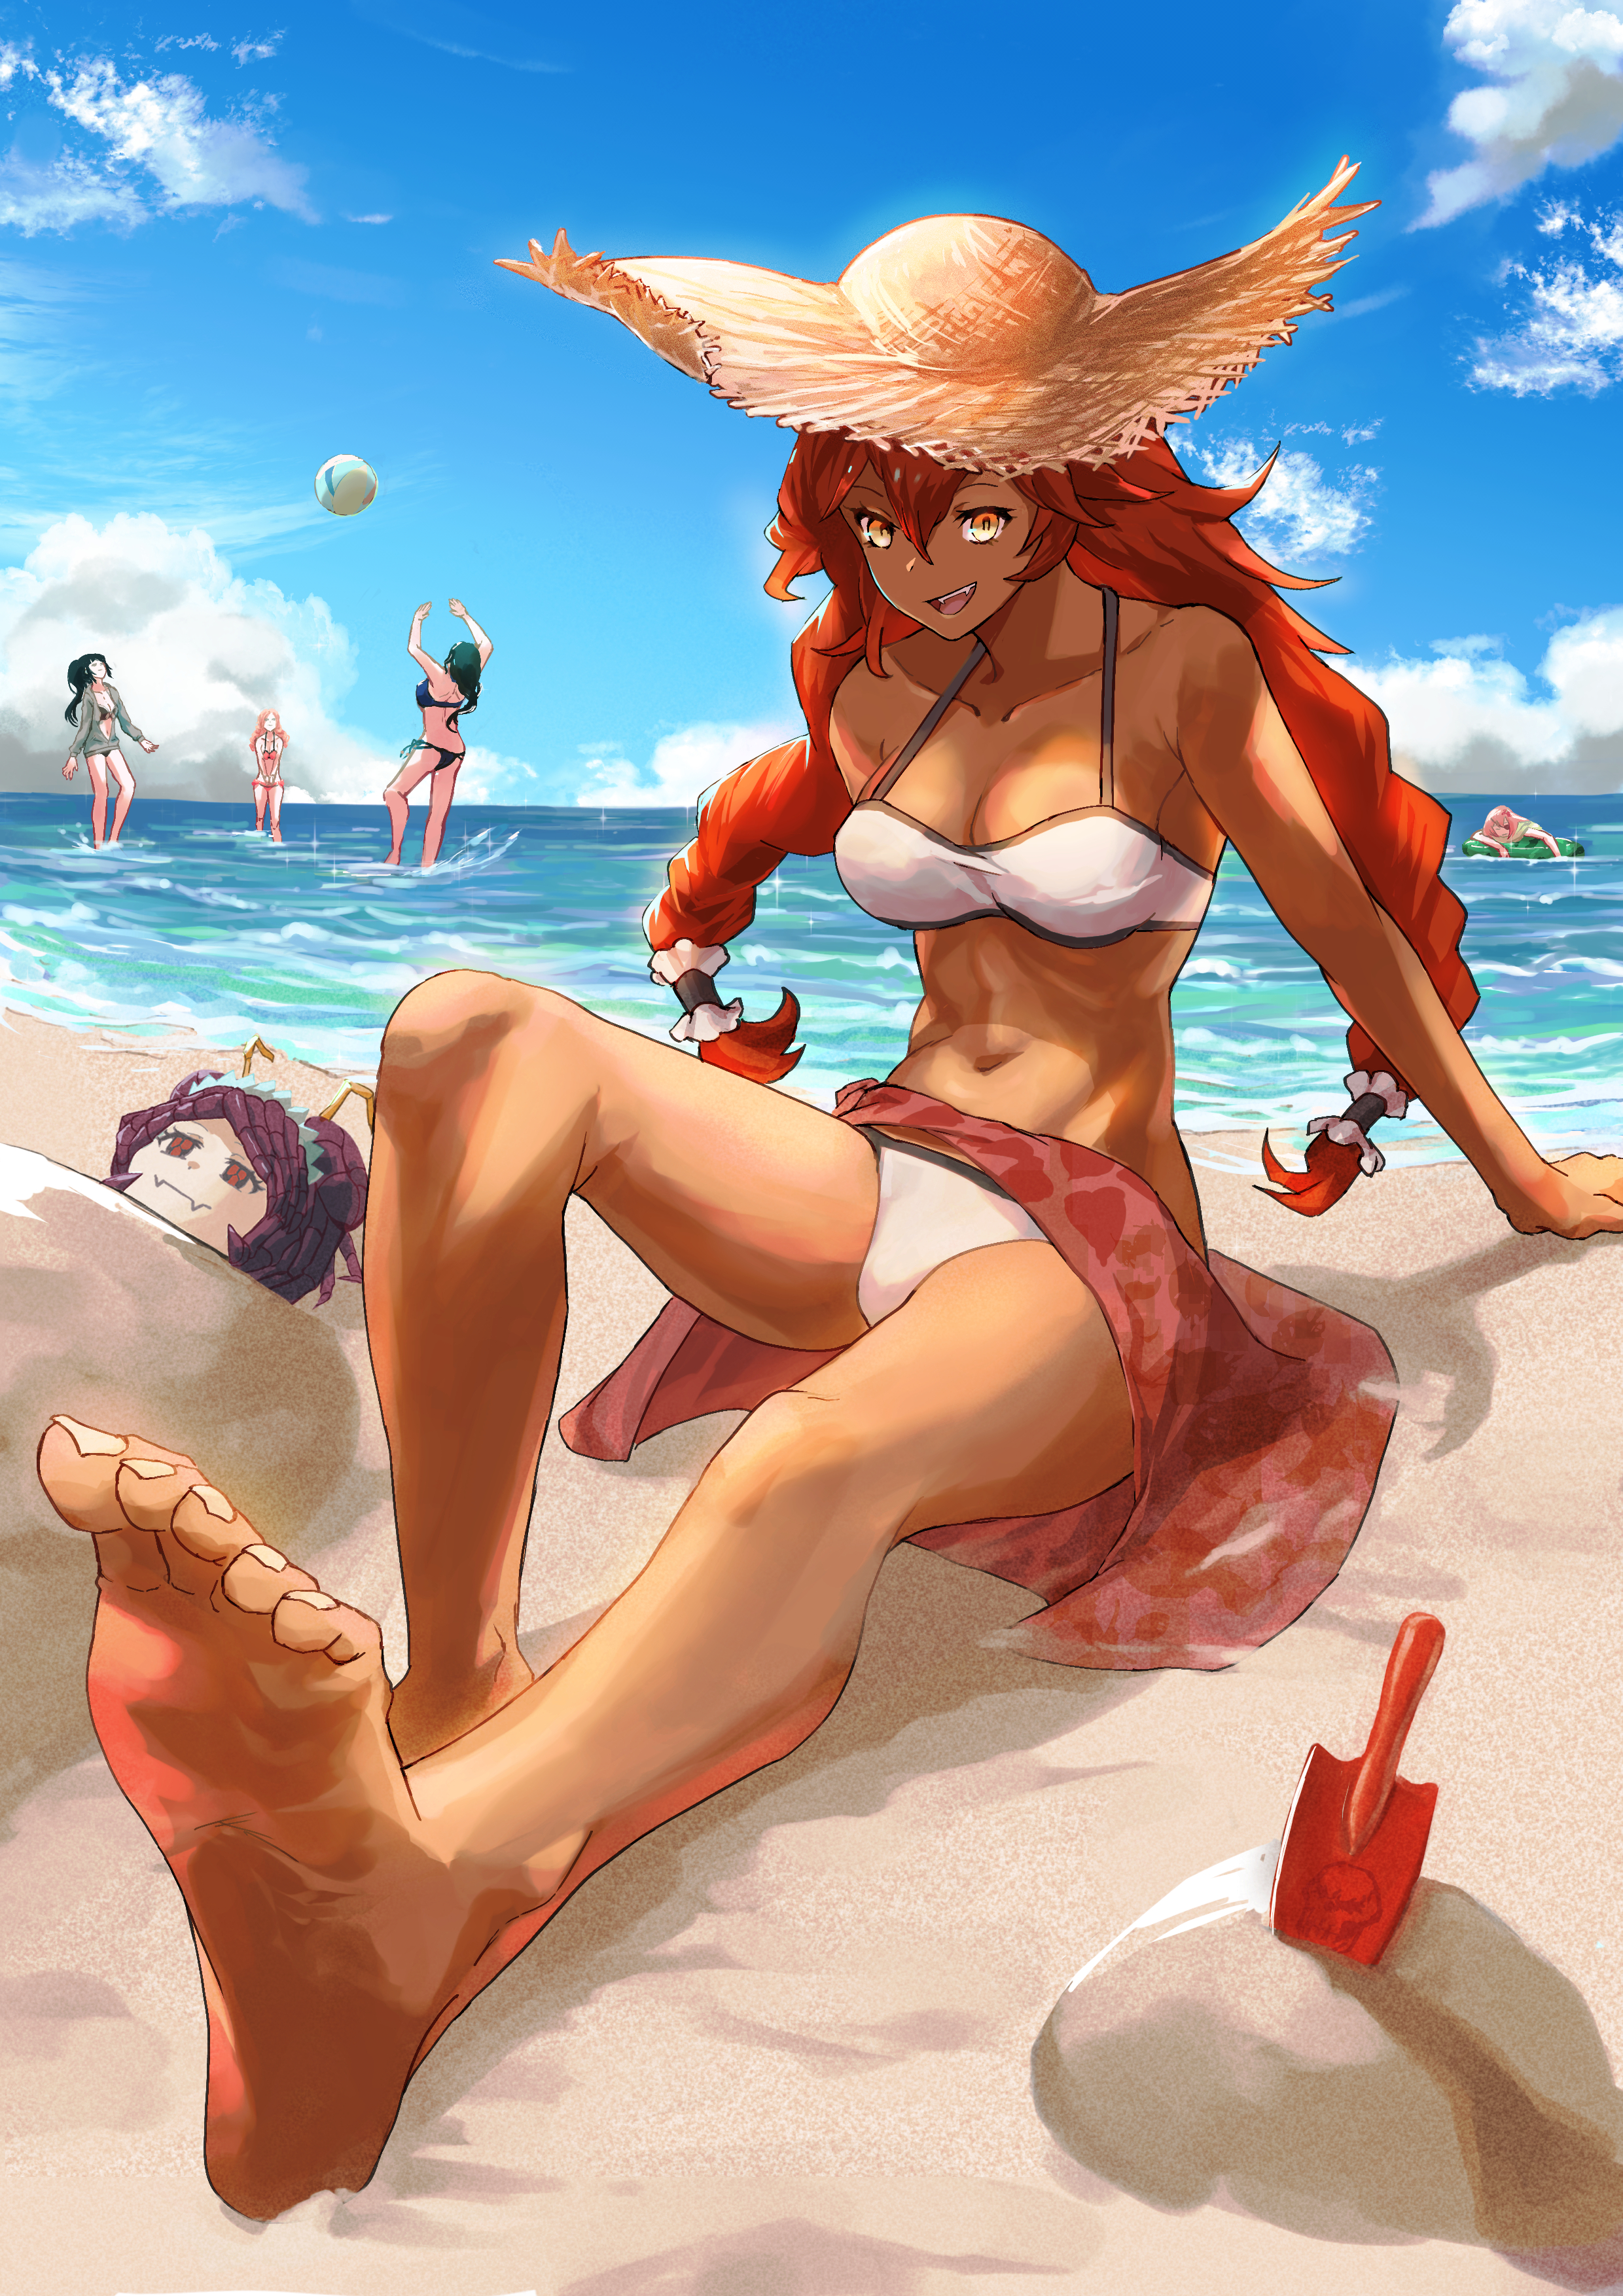 Anime 2480x3508 Overlord (anime) 2D anime long hair monster girl wolf girls big boobs cleavage white bikini beach summer bare shoulders barefoot redhead dark skin thighs the gap arm(s) behind back arms up belly button curvy braids Lupusregina Beta Entoma Vasilissa Zeta Gamma Narberal Yuri Alpha Solution Epsilon looking at viewer ecchi fan art smiling open mouth belly portrait display Narberal Gamma standing in water beach ball straw hat group of women clouds women on beach women outdoors lying on beach